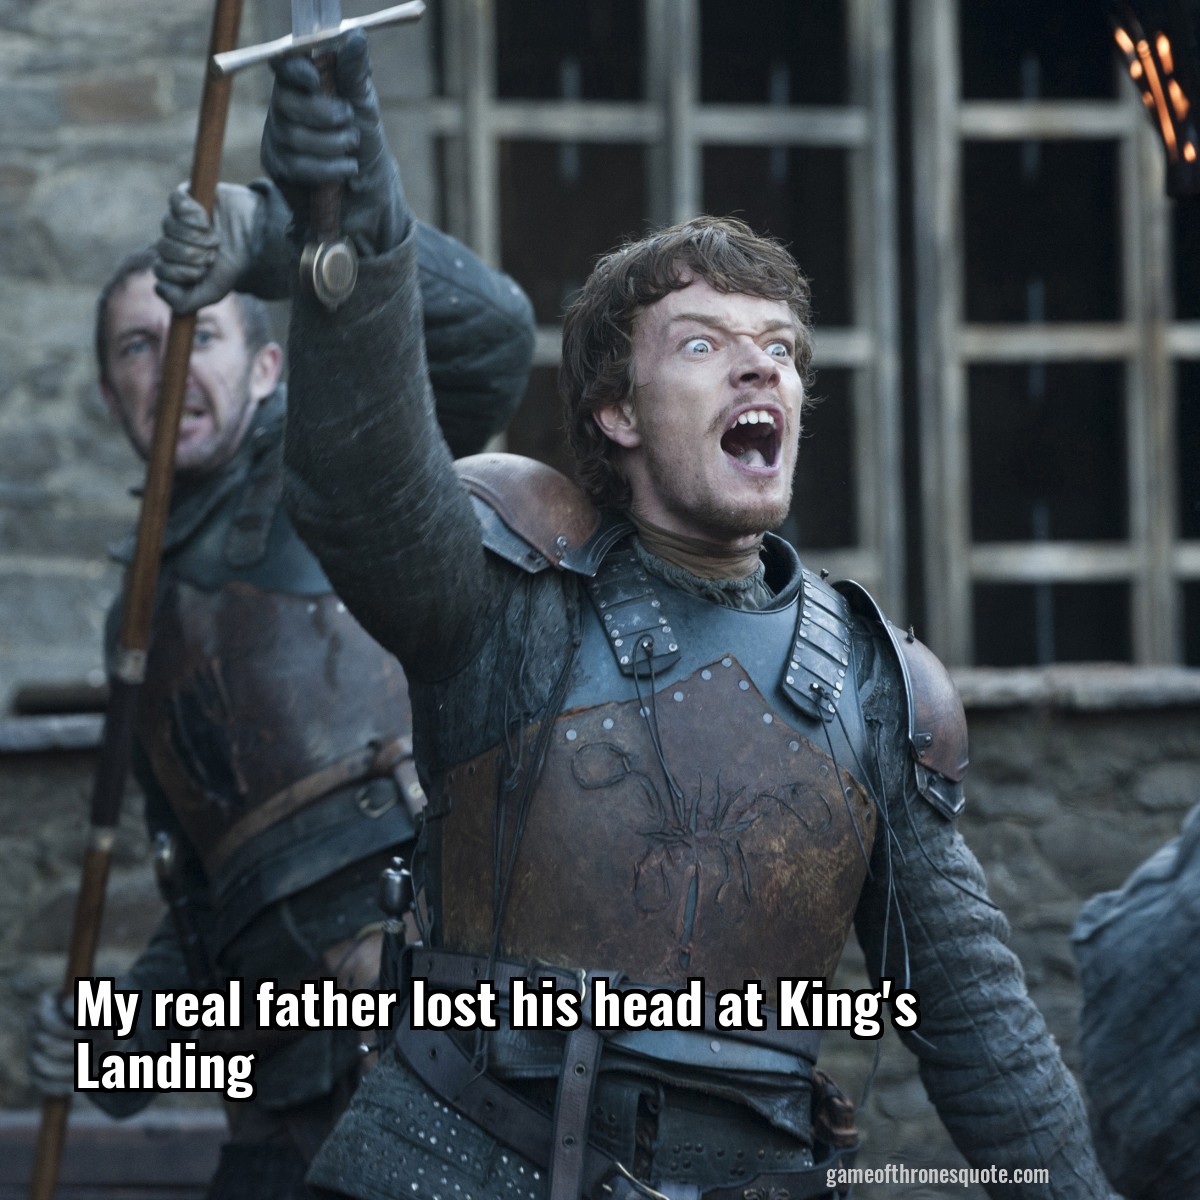 My real father lost his head at King's Landing